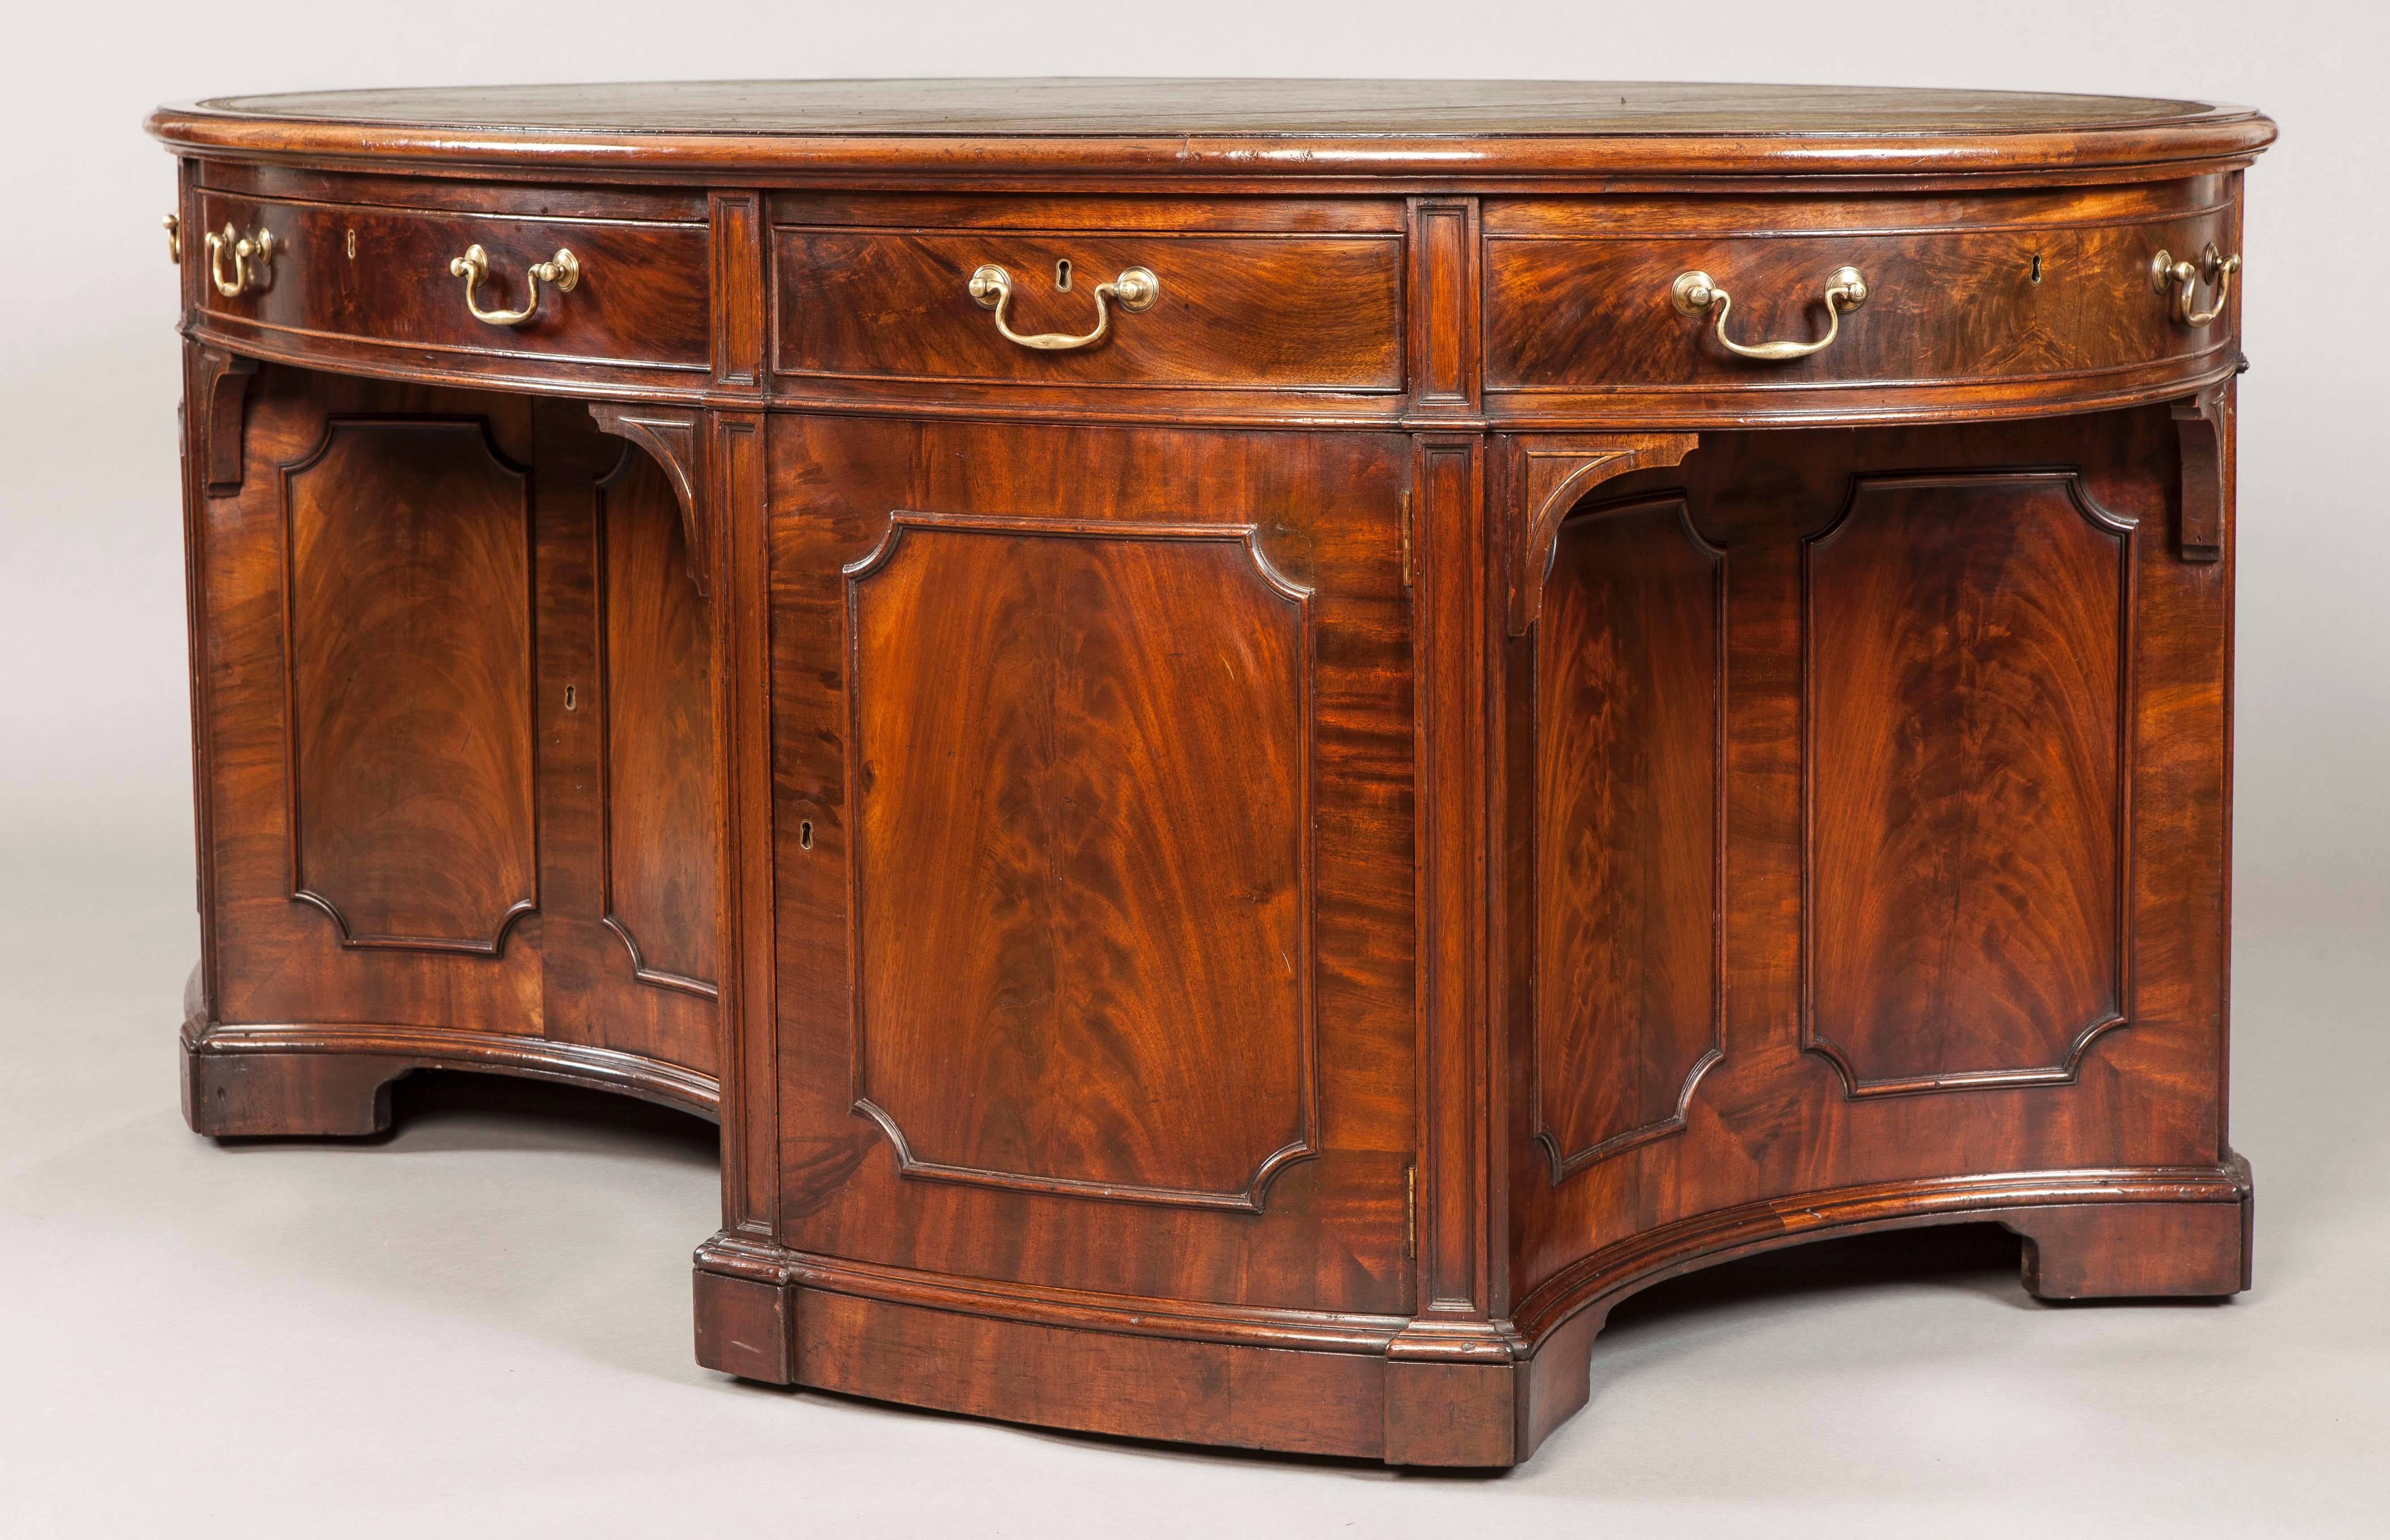 An elliptical library table after a design by Thomas Sheraton.

Constructed in a well figured mahogany; of double sided free standing form, having cupboards adorned with mouldings flanking the kneeholes, set within a series of vertical stiles and